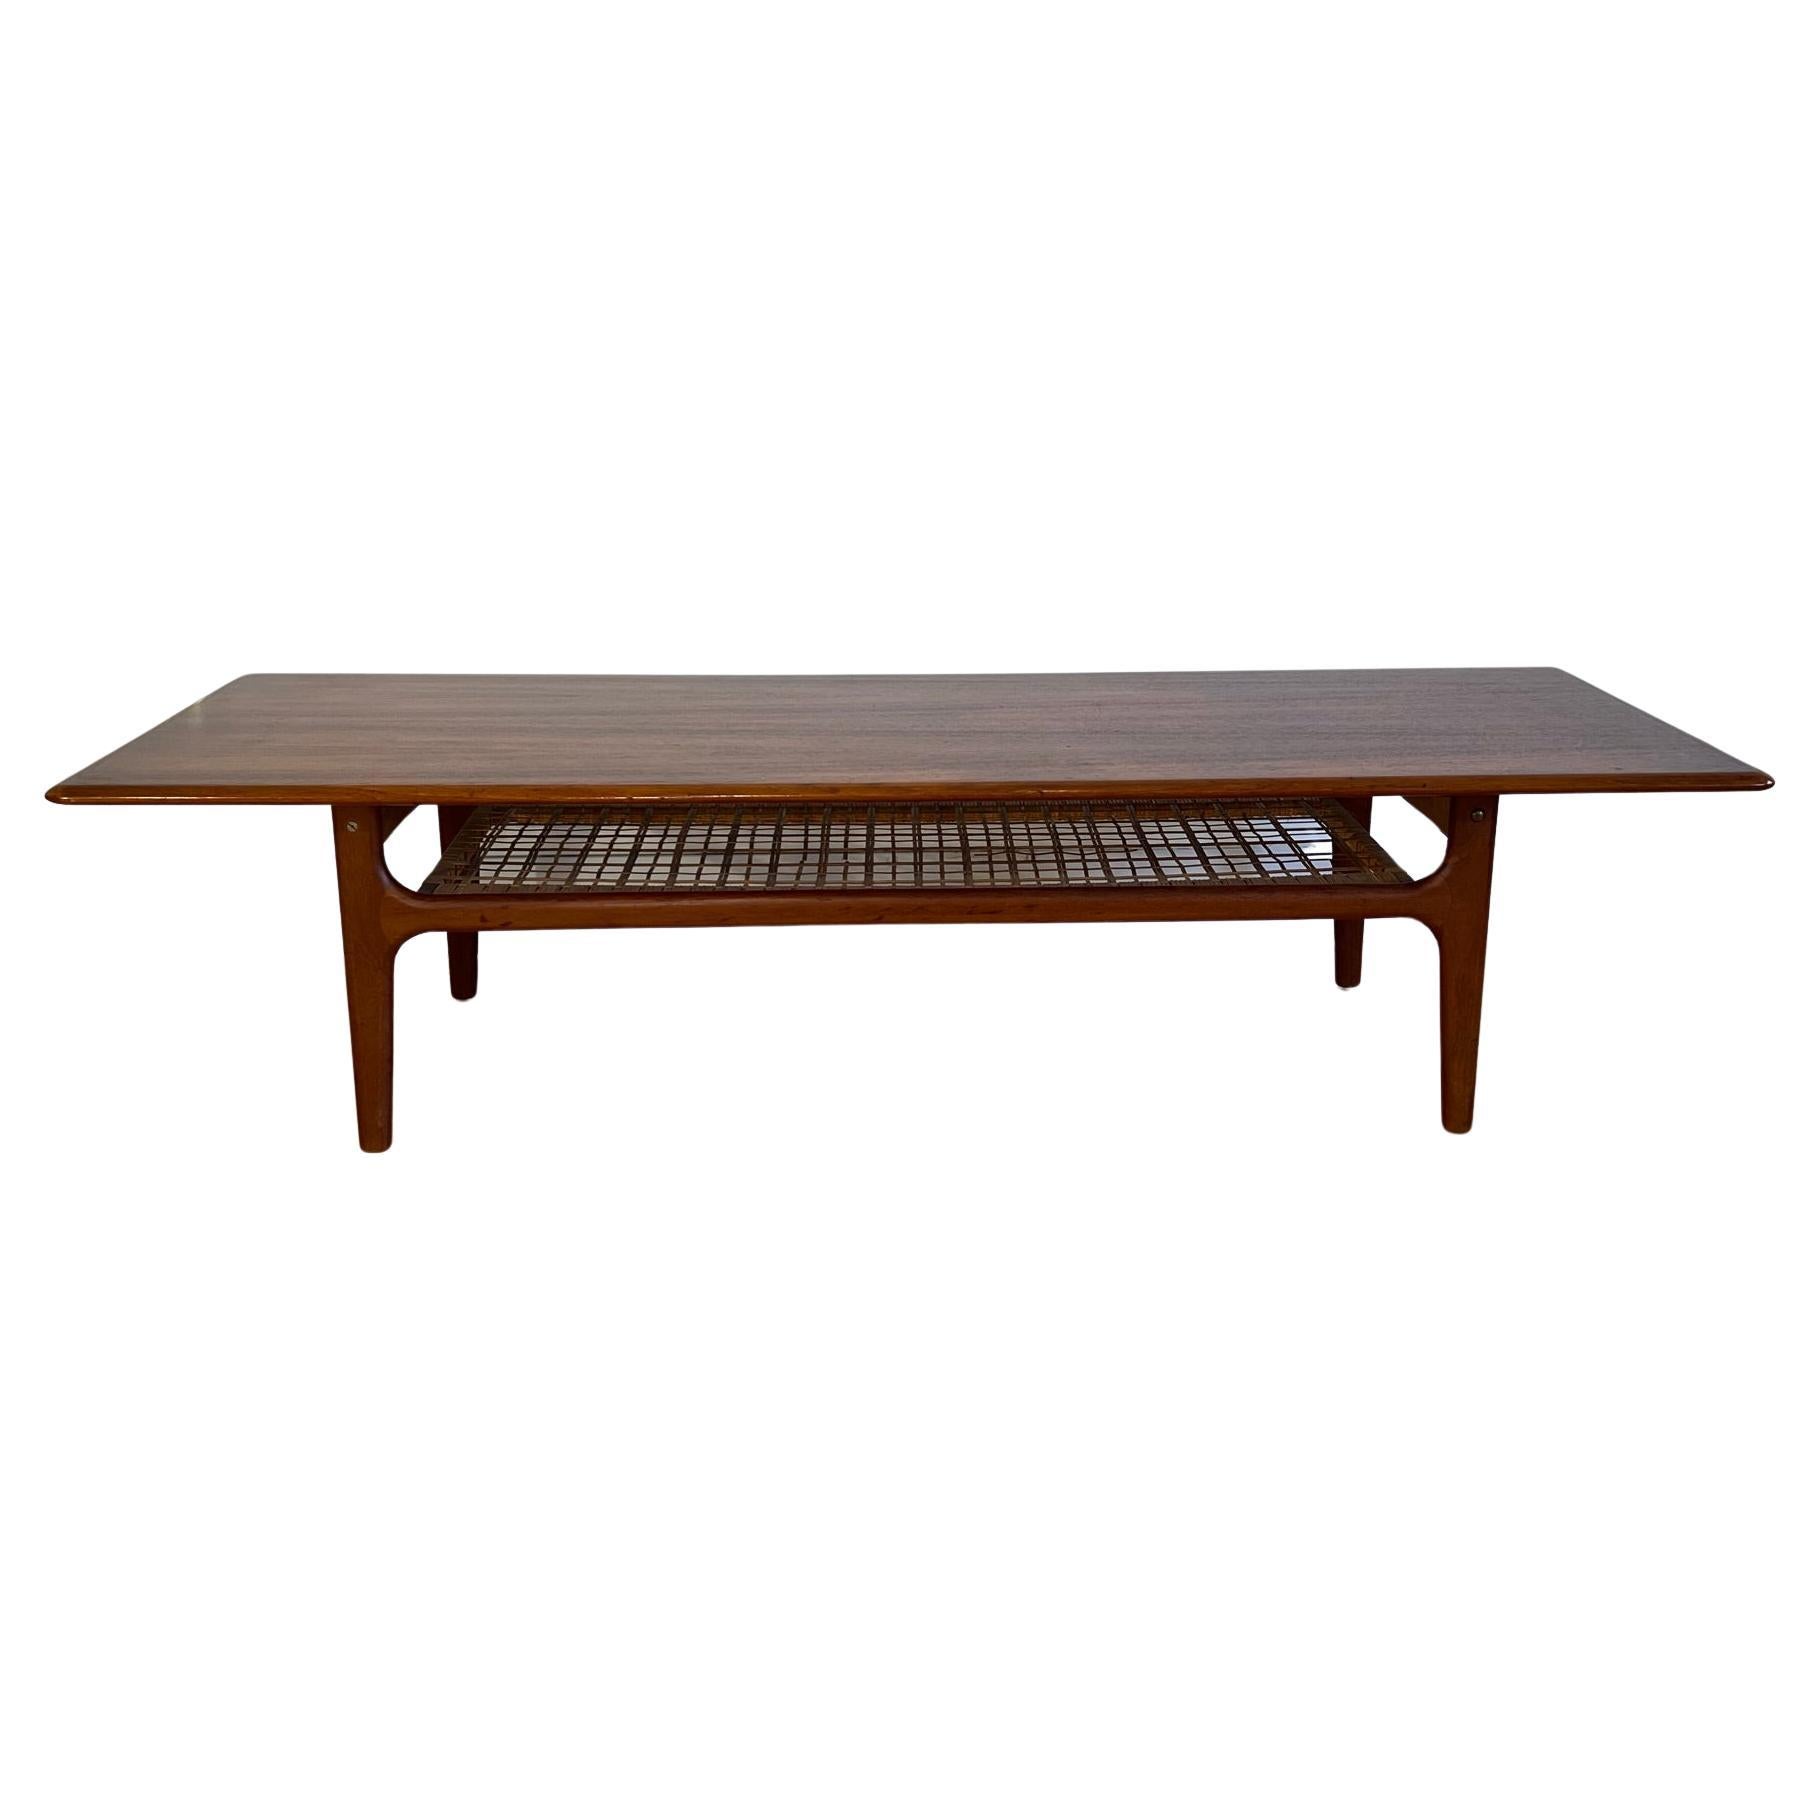 Danish Modern Teak and Cane Coffee Table, attrib. to Trioh, Denmark, 1960s For Sale